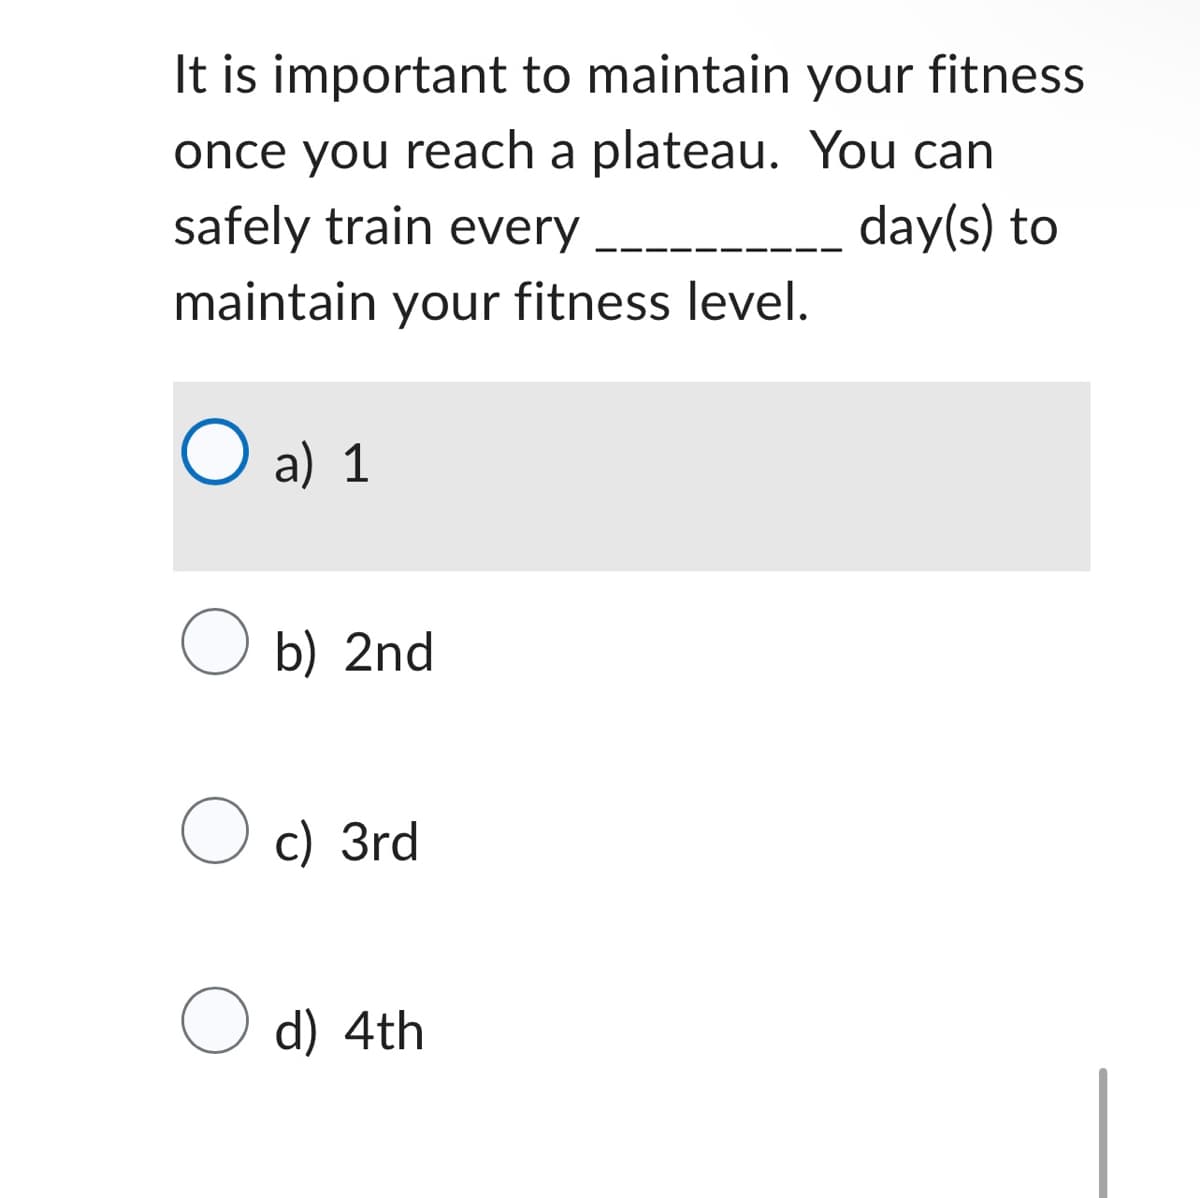 It is important to maintain your fitness
once you reach a plateau. You can
safely train every
day(s) to
maintain your fitness level.
O a)
a) 1
O b) 2nd
O c) 3rd
O d) 4th